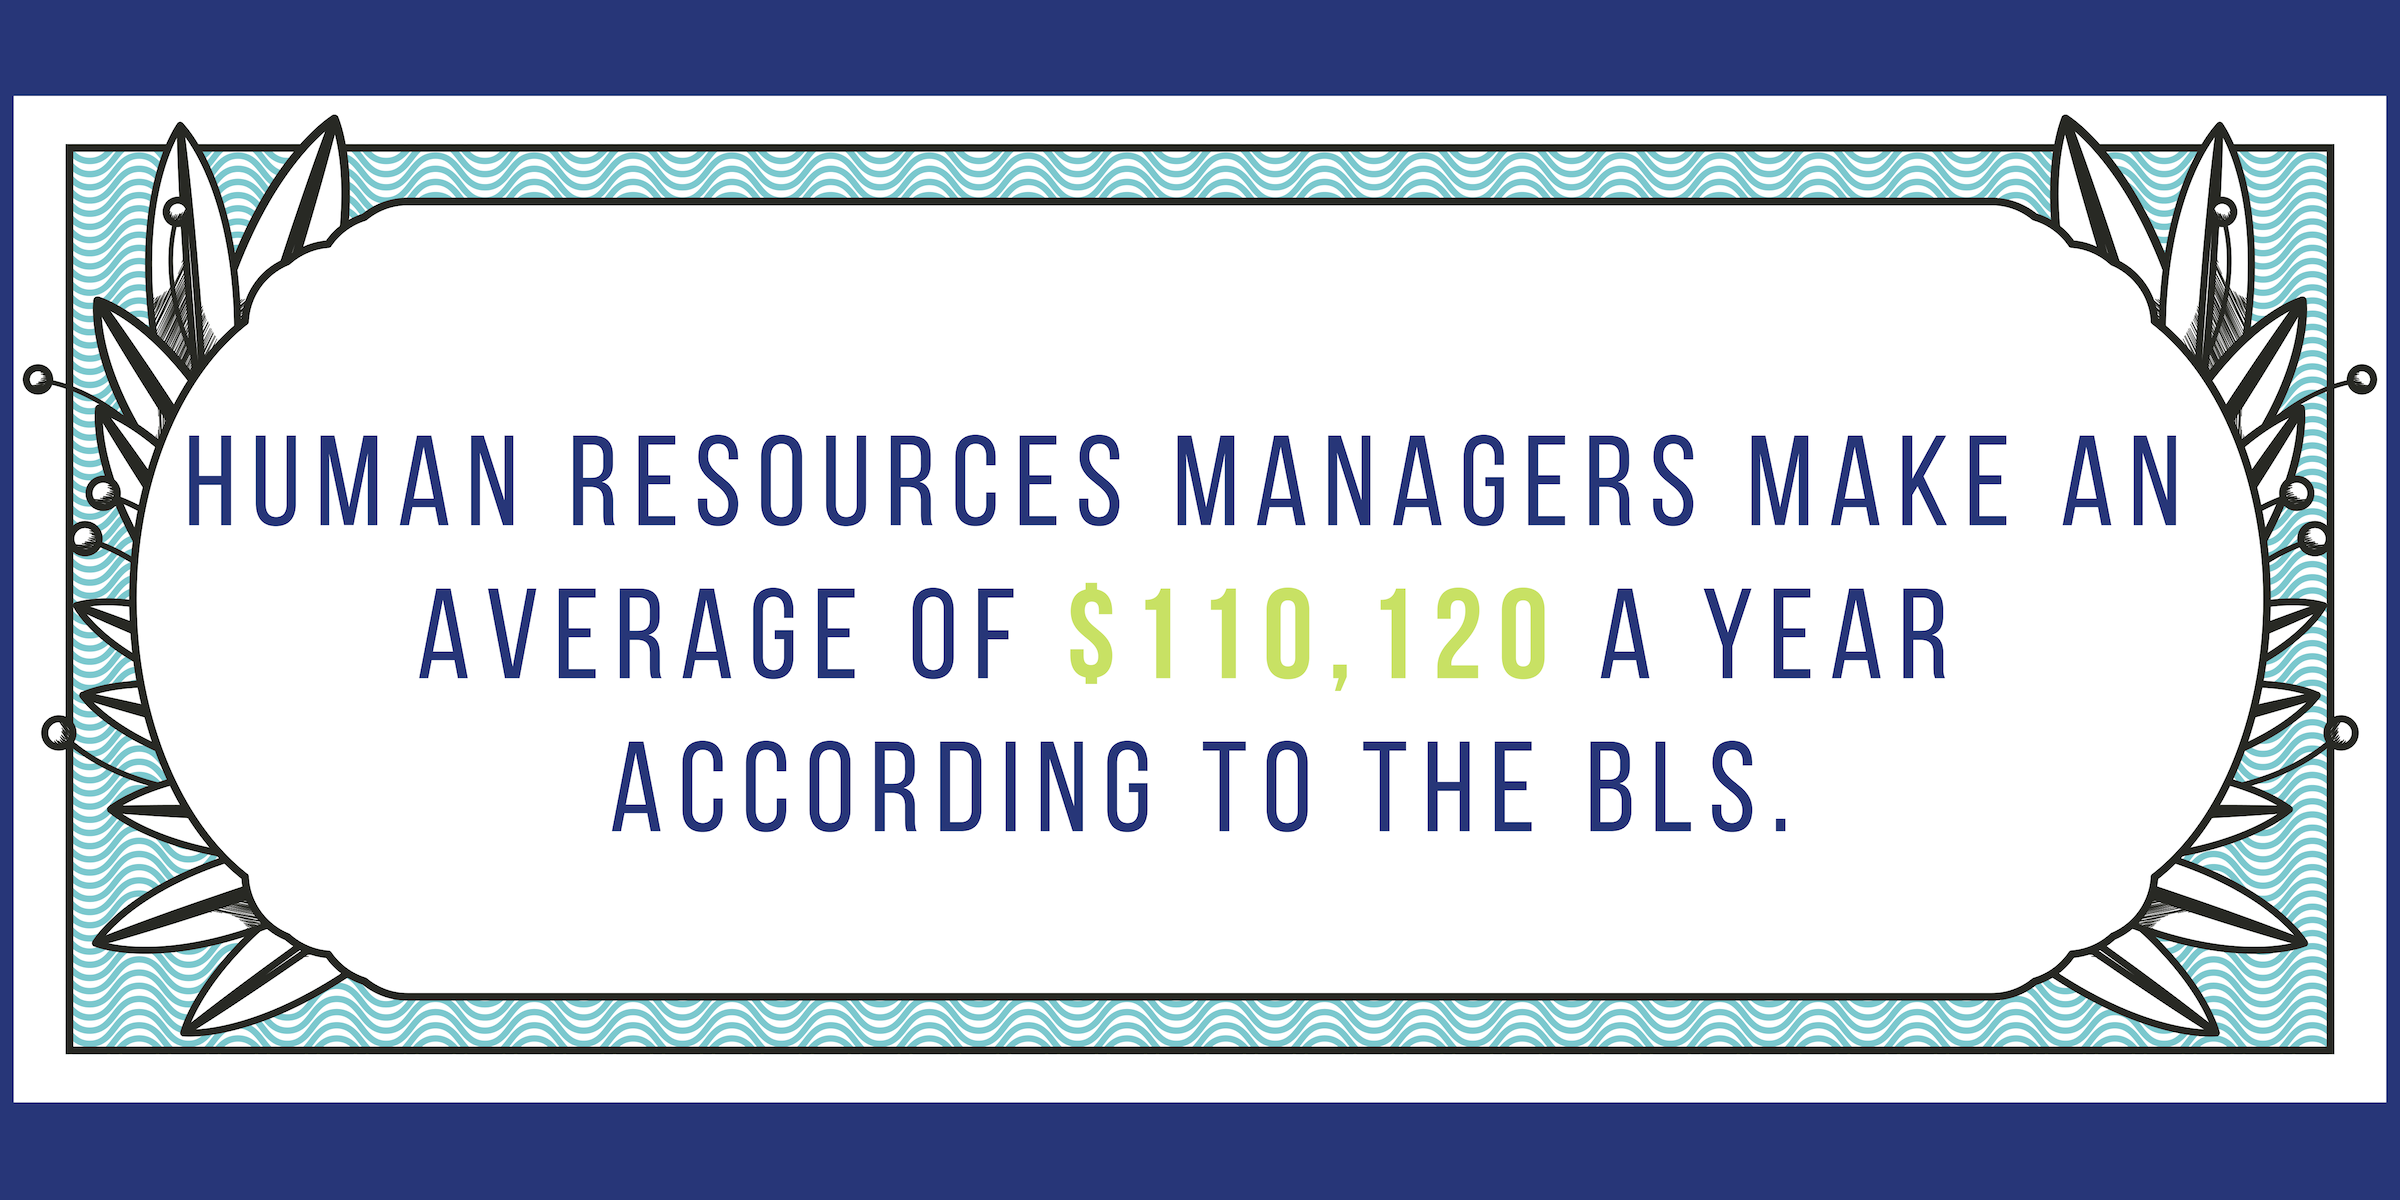 Human resources managers make an average of $110,120 a year according to the BLS